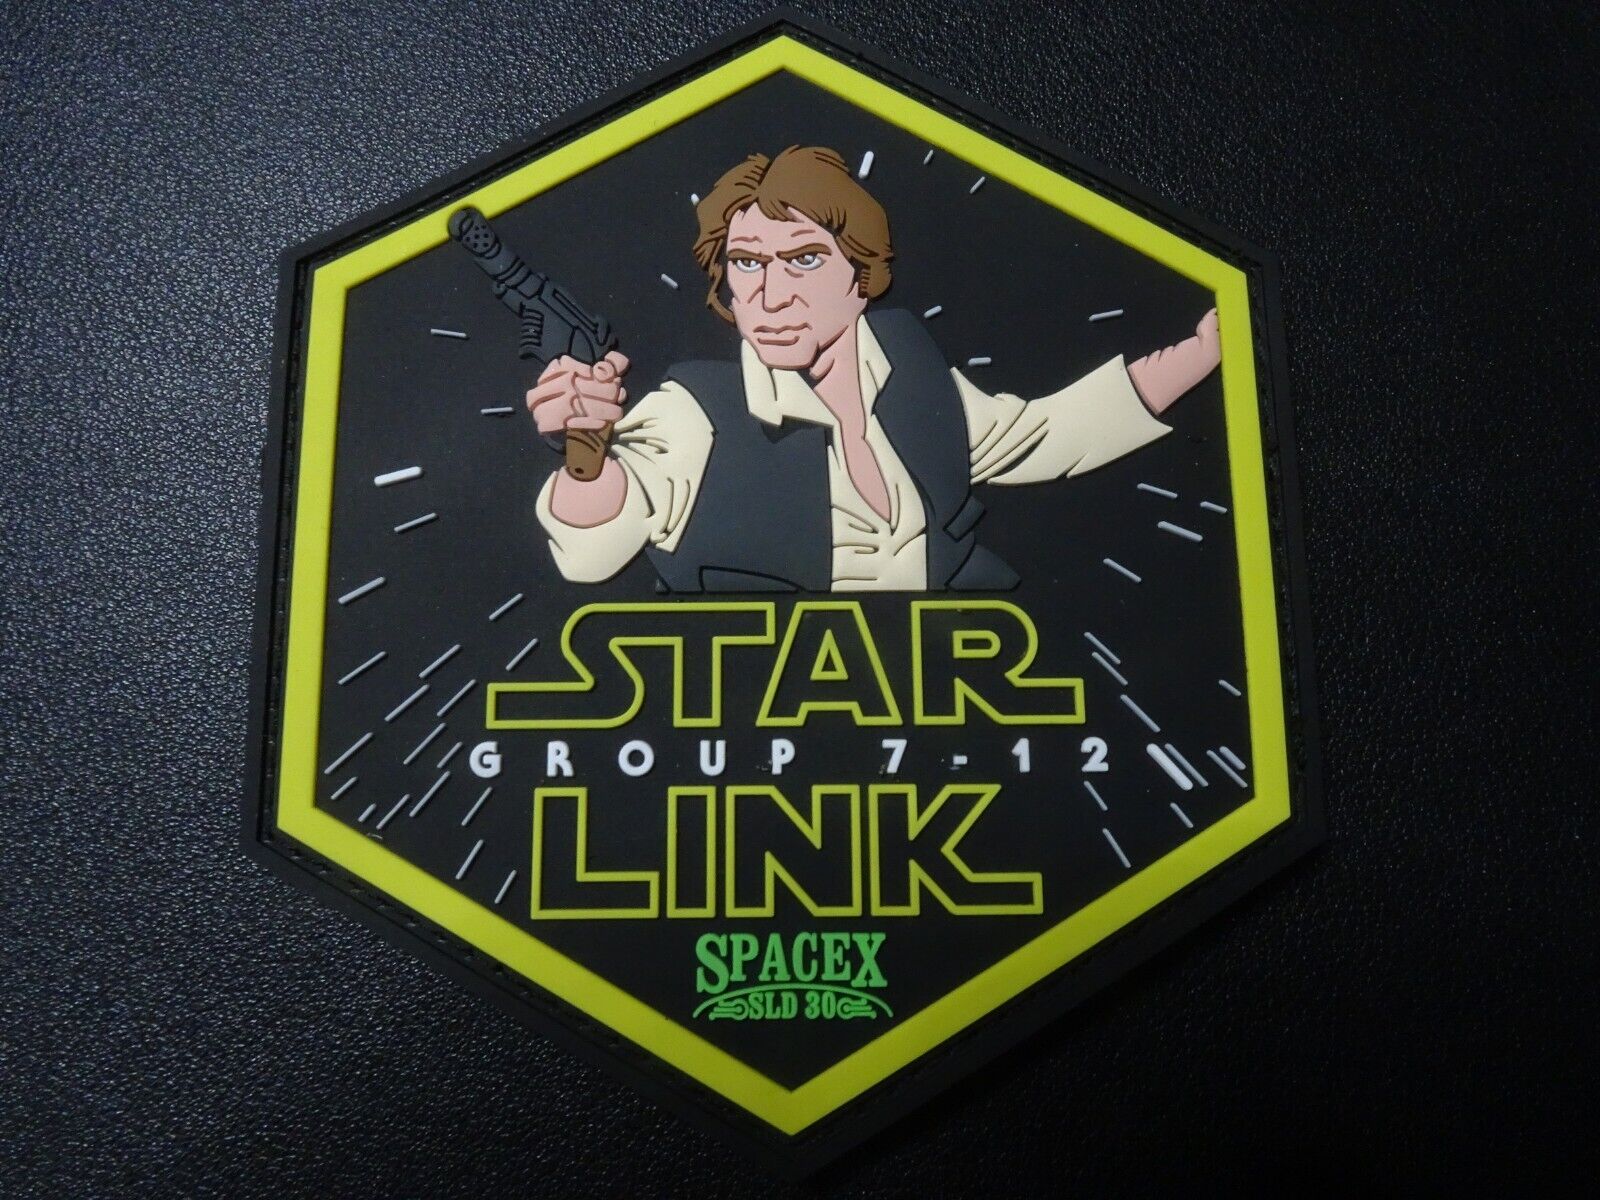 VSFB Western Range Han Solo GROUP 7-12 STAR LINK  SLD-30 SPACE-X Mission Patch